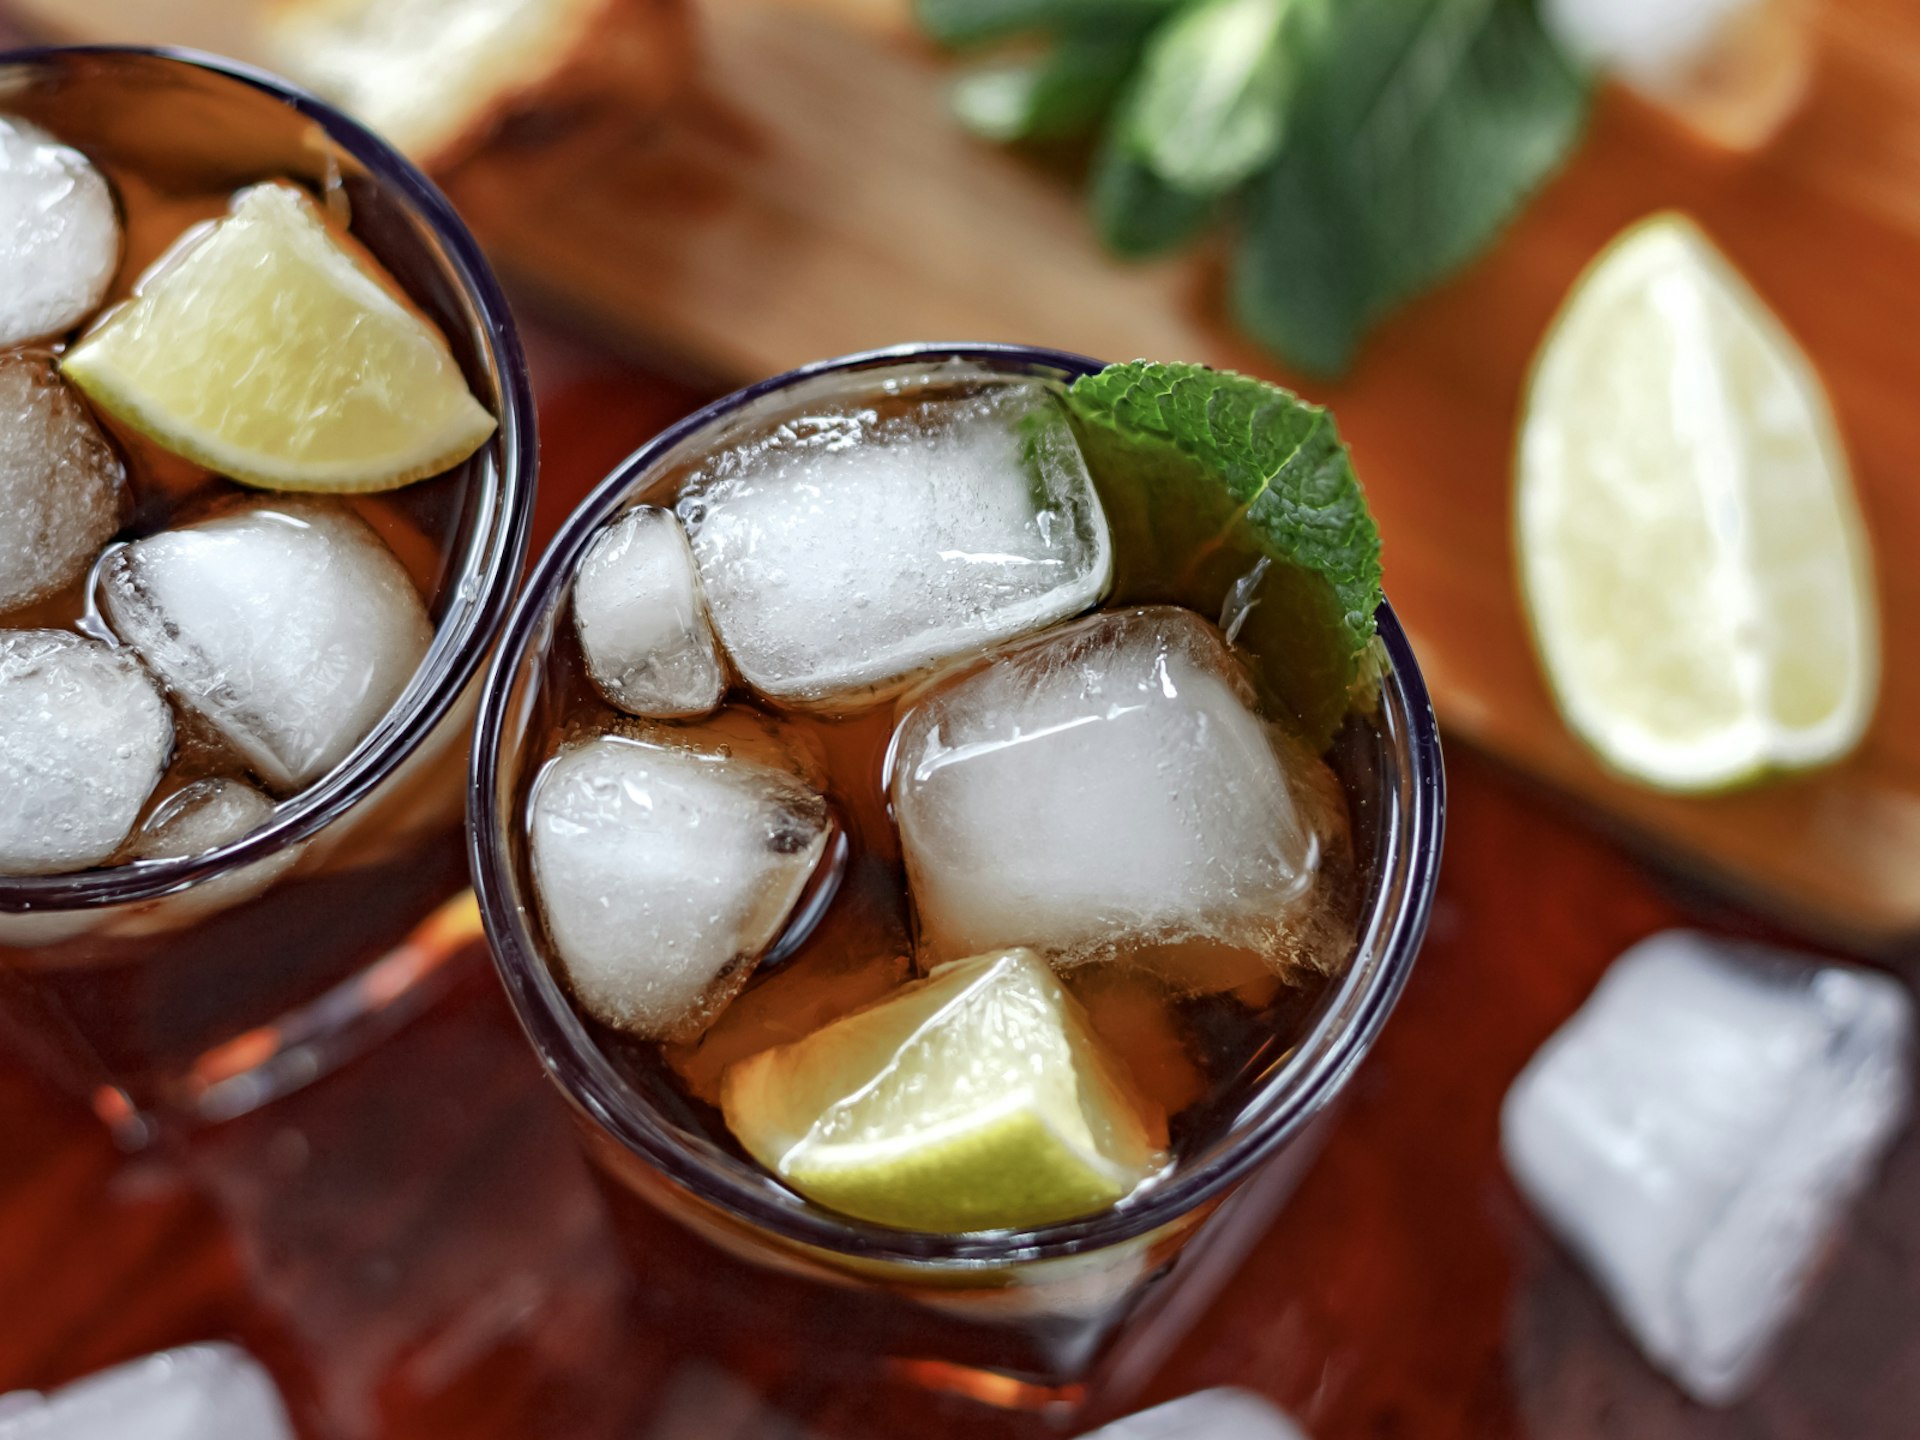 An aerial view of a glass of rum with ice cubes and lime